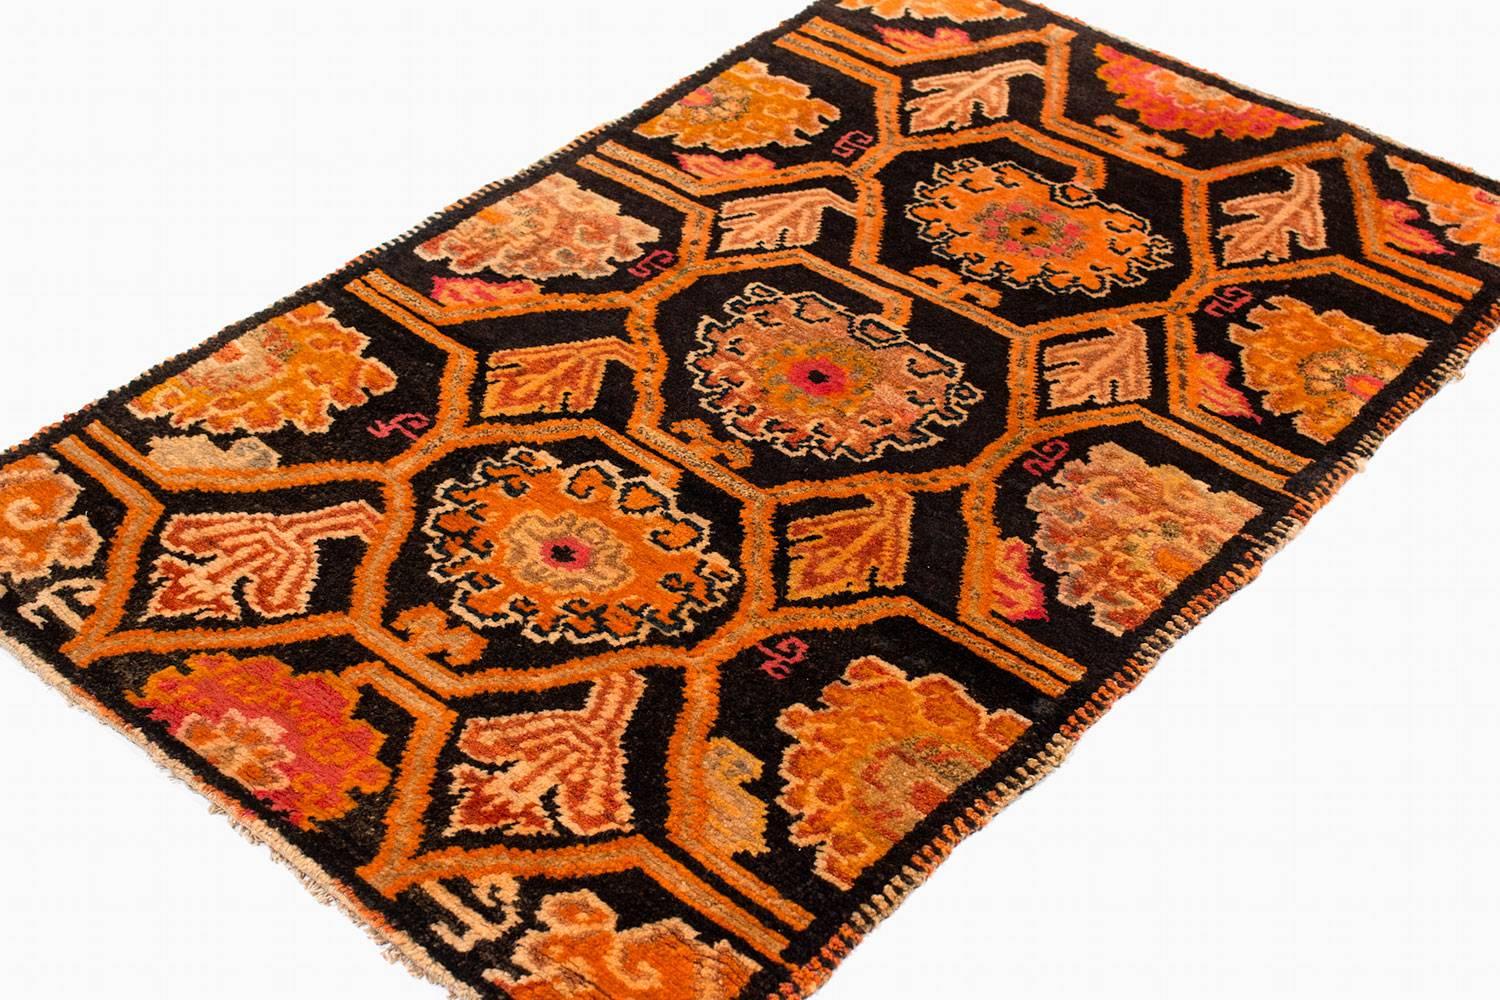 Deco-esque floral designs and grid-work cover the field of rich espresso brown in this 1930s carpet. Intricate designs are woven in rich orange, cinnamon brown and coral red, with touches of navy and slate blue. The carpet's border features unique